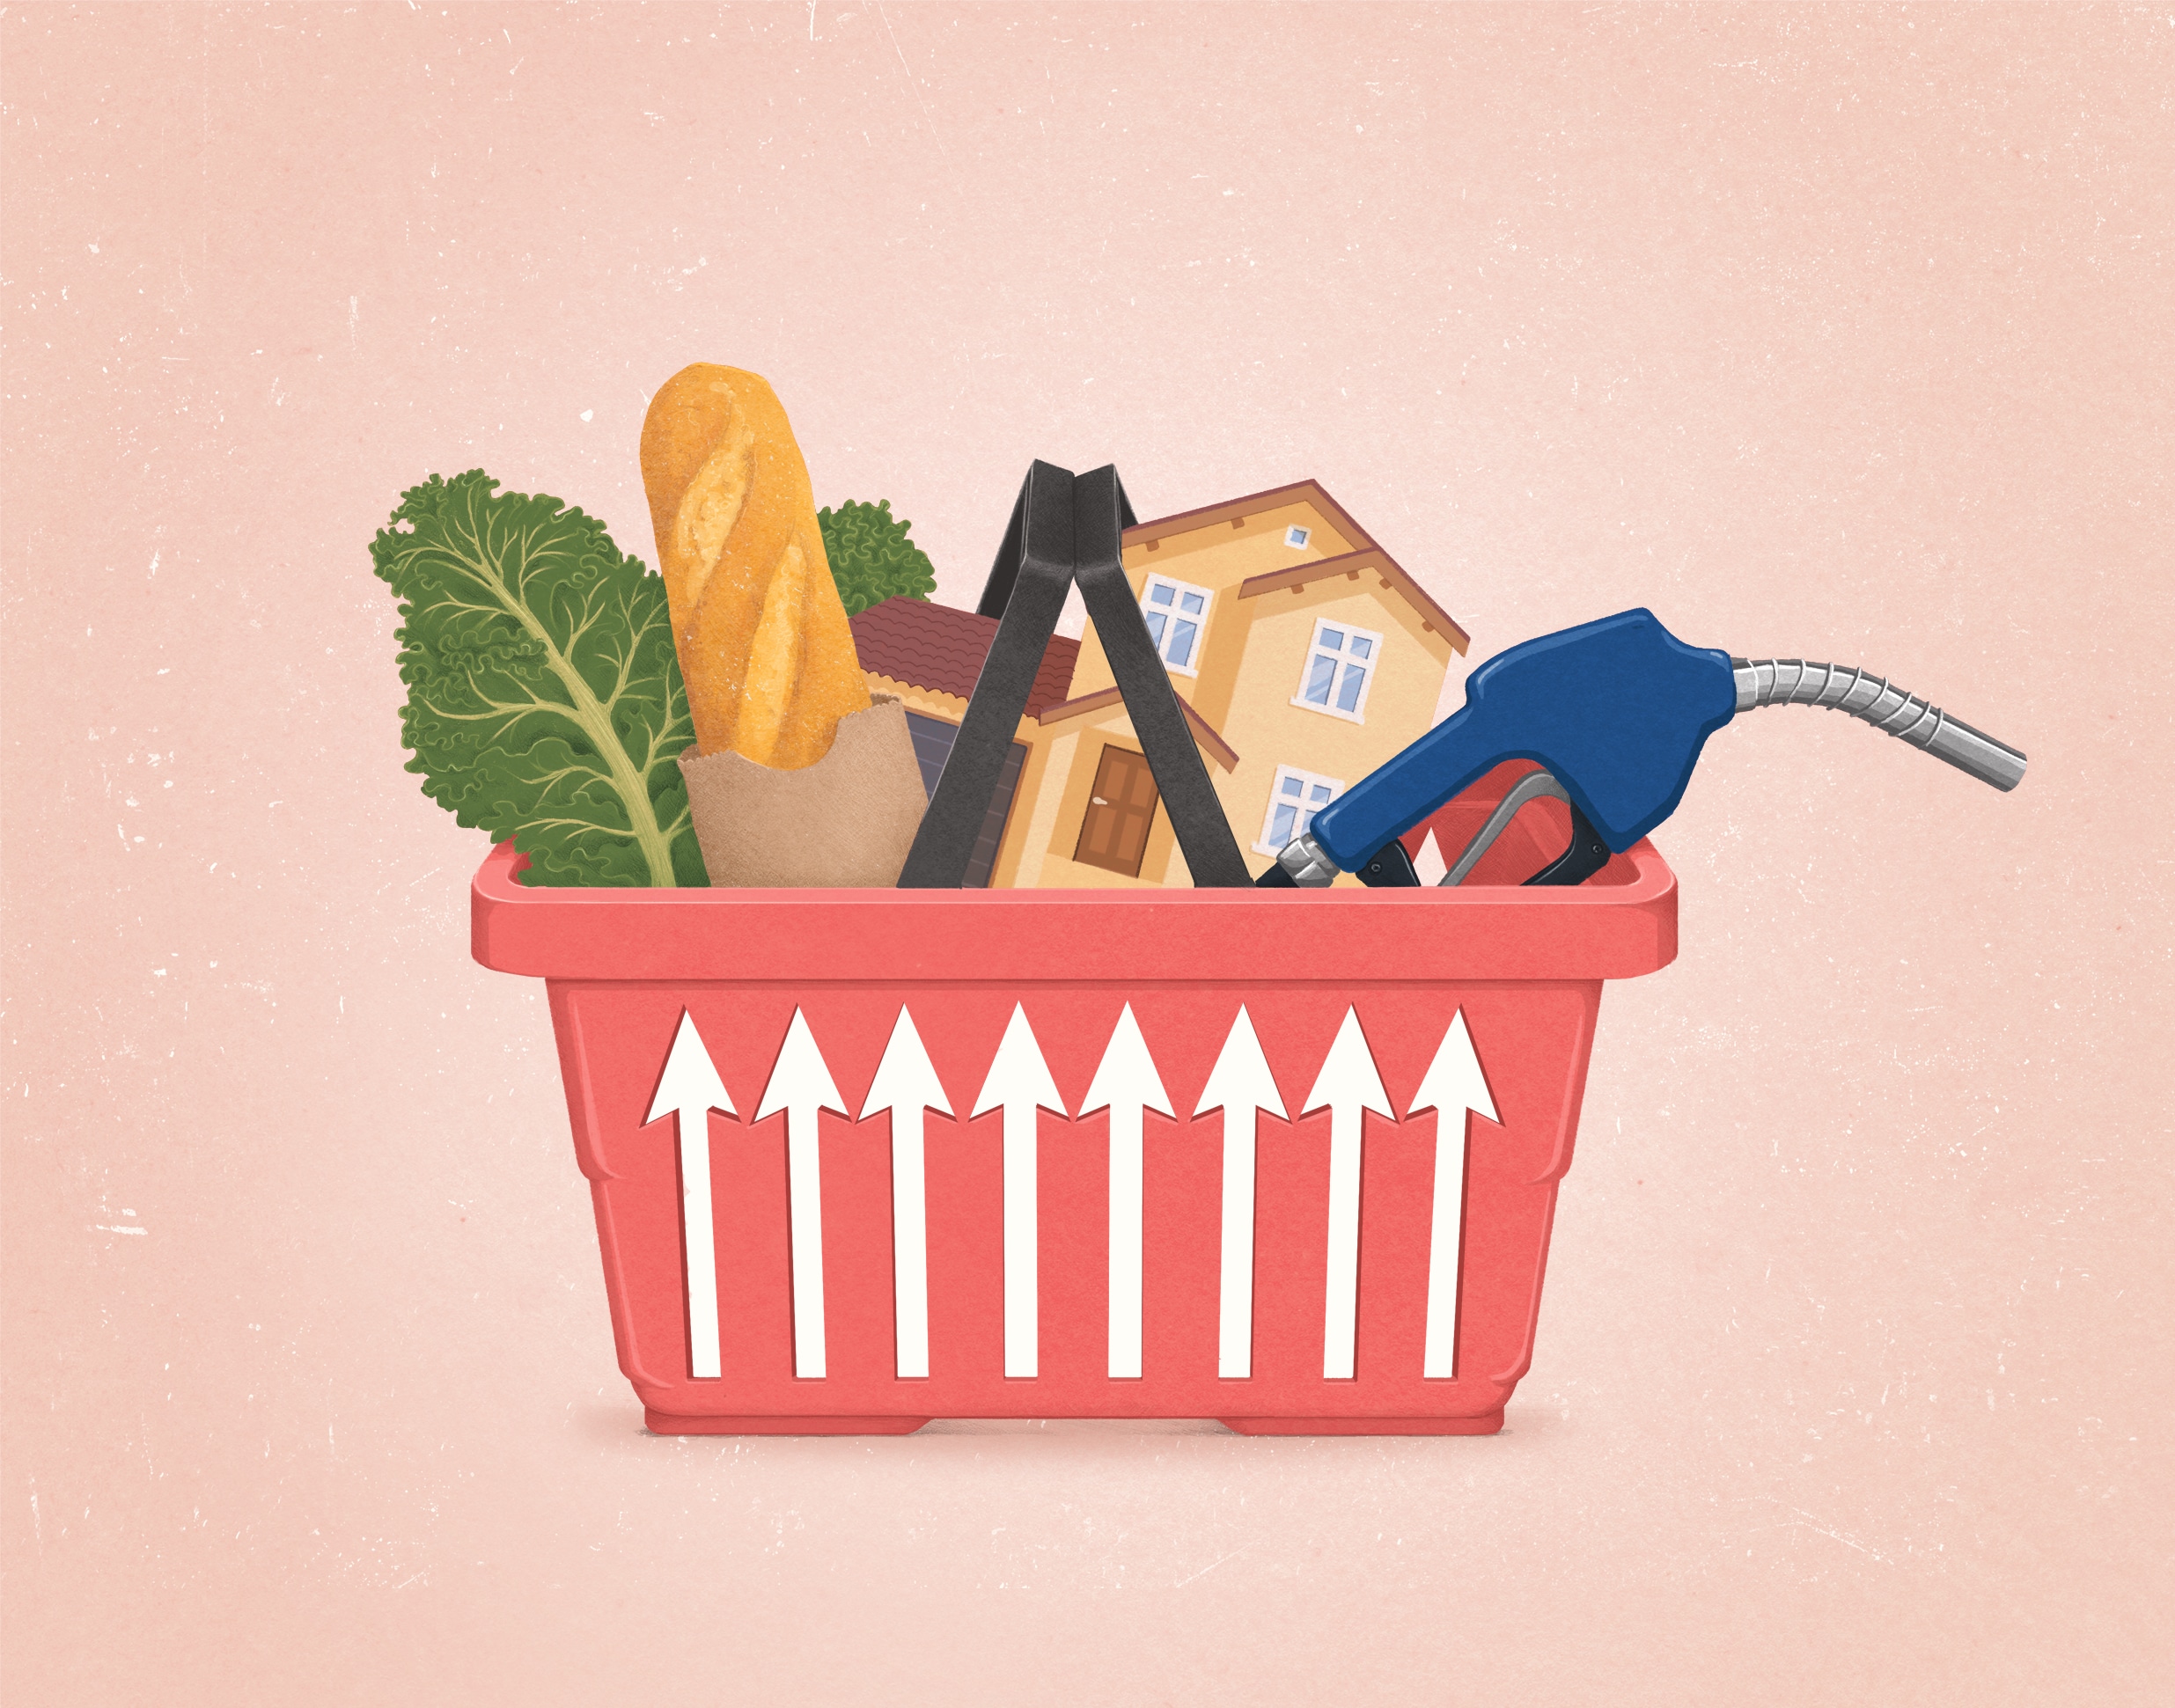 Illustration of a shopping basket filled with bread, kale, a gas pump nozzle, and a house. The grating on the sides of the basket are shaped like up arrows.